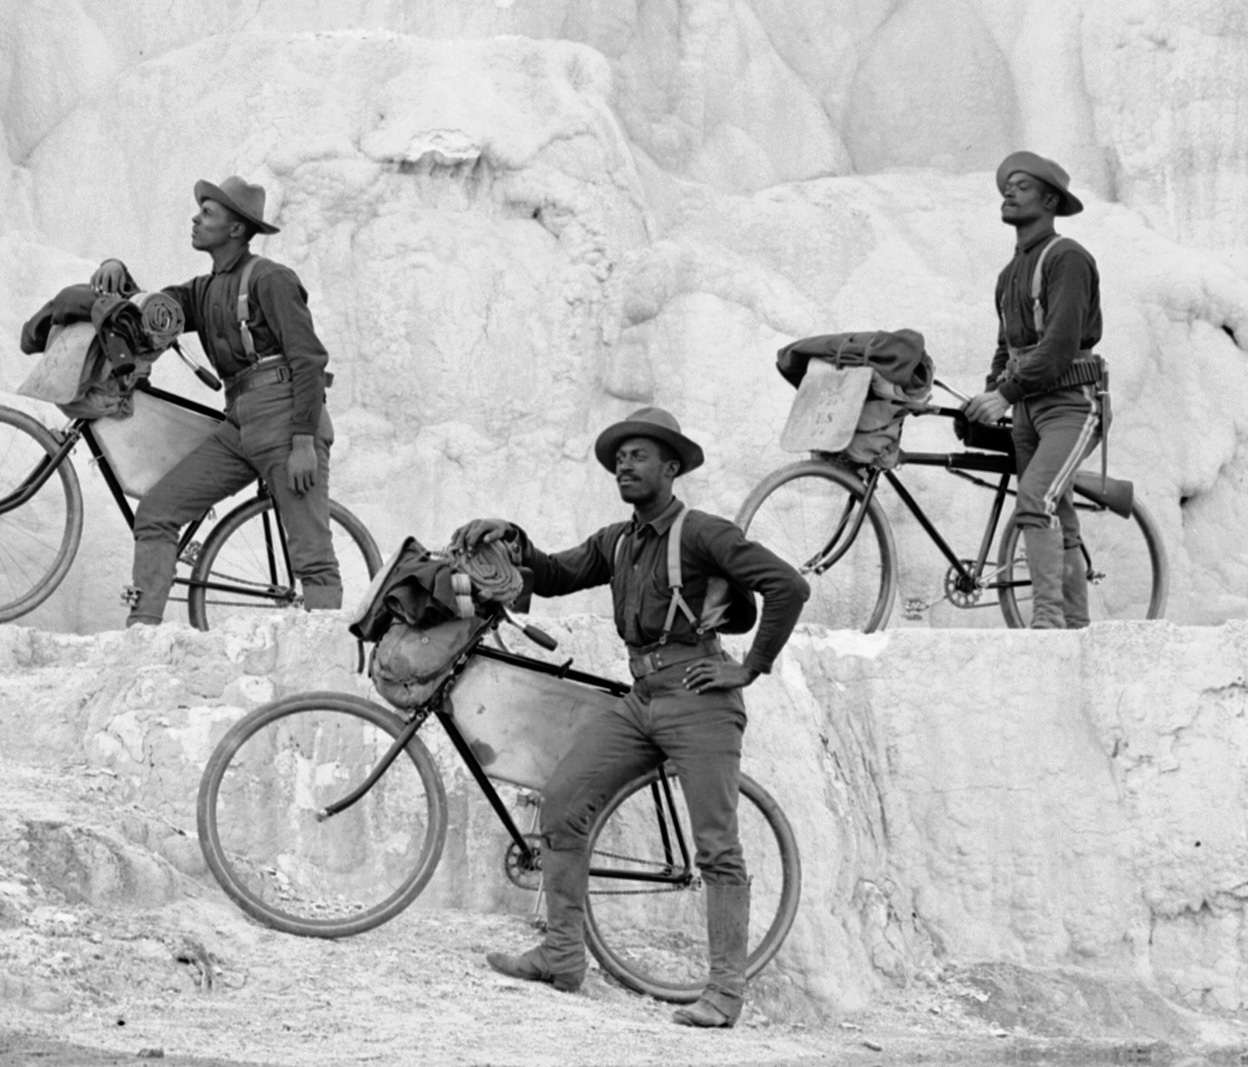 25th Infantry Regiment Bicycle Corps on Minerva Terrace, Mammoth Hot Springs, Yellowstone National Park, MTHS H-03614 (cropped)